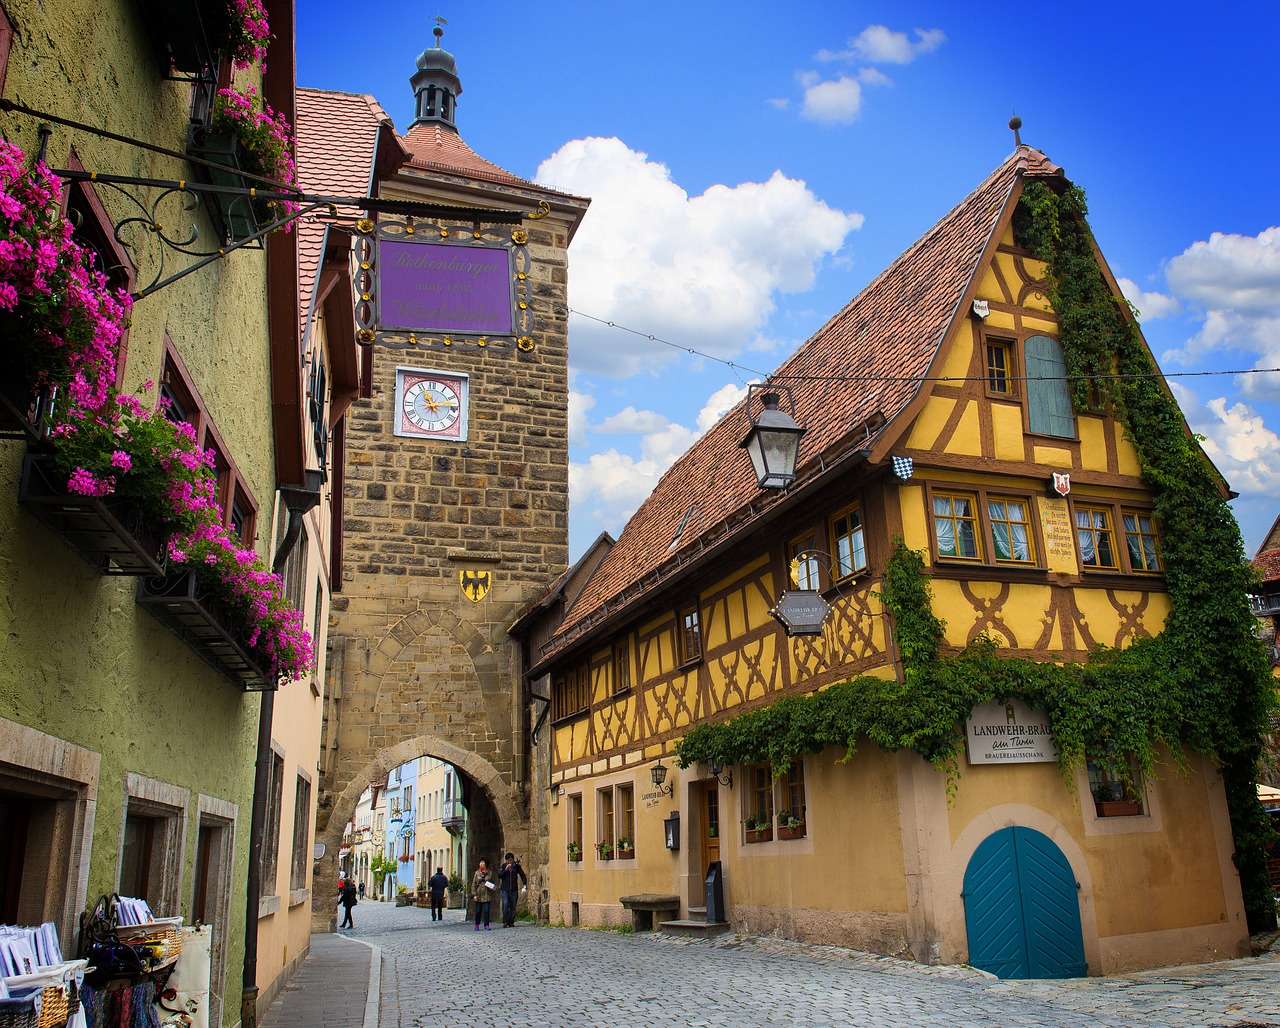 Private Tour of Rothenburg from Munich